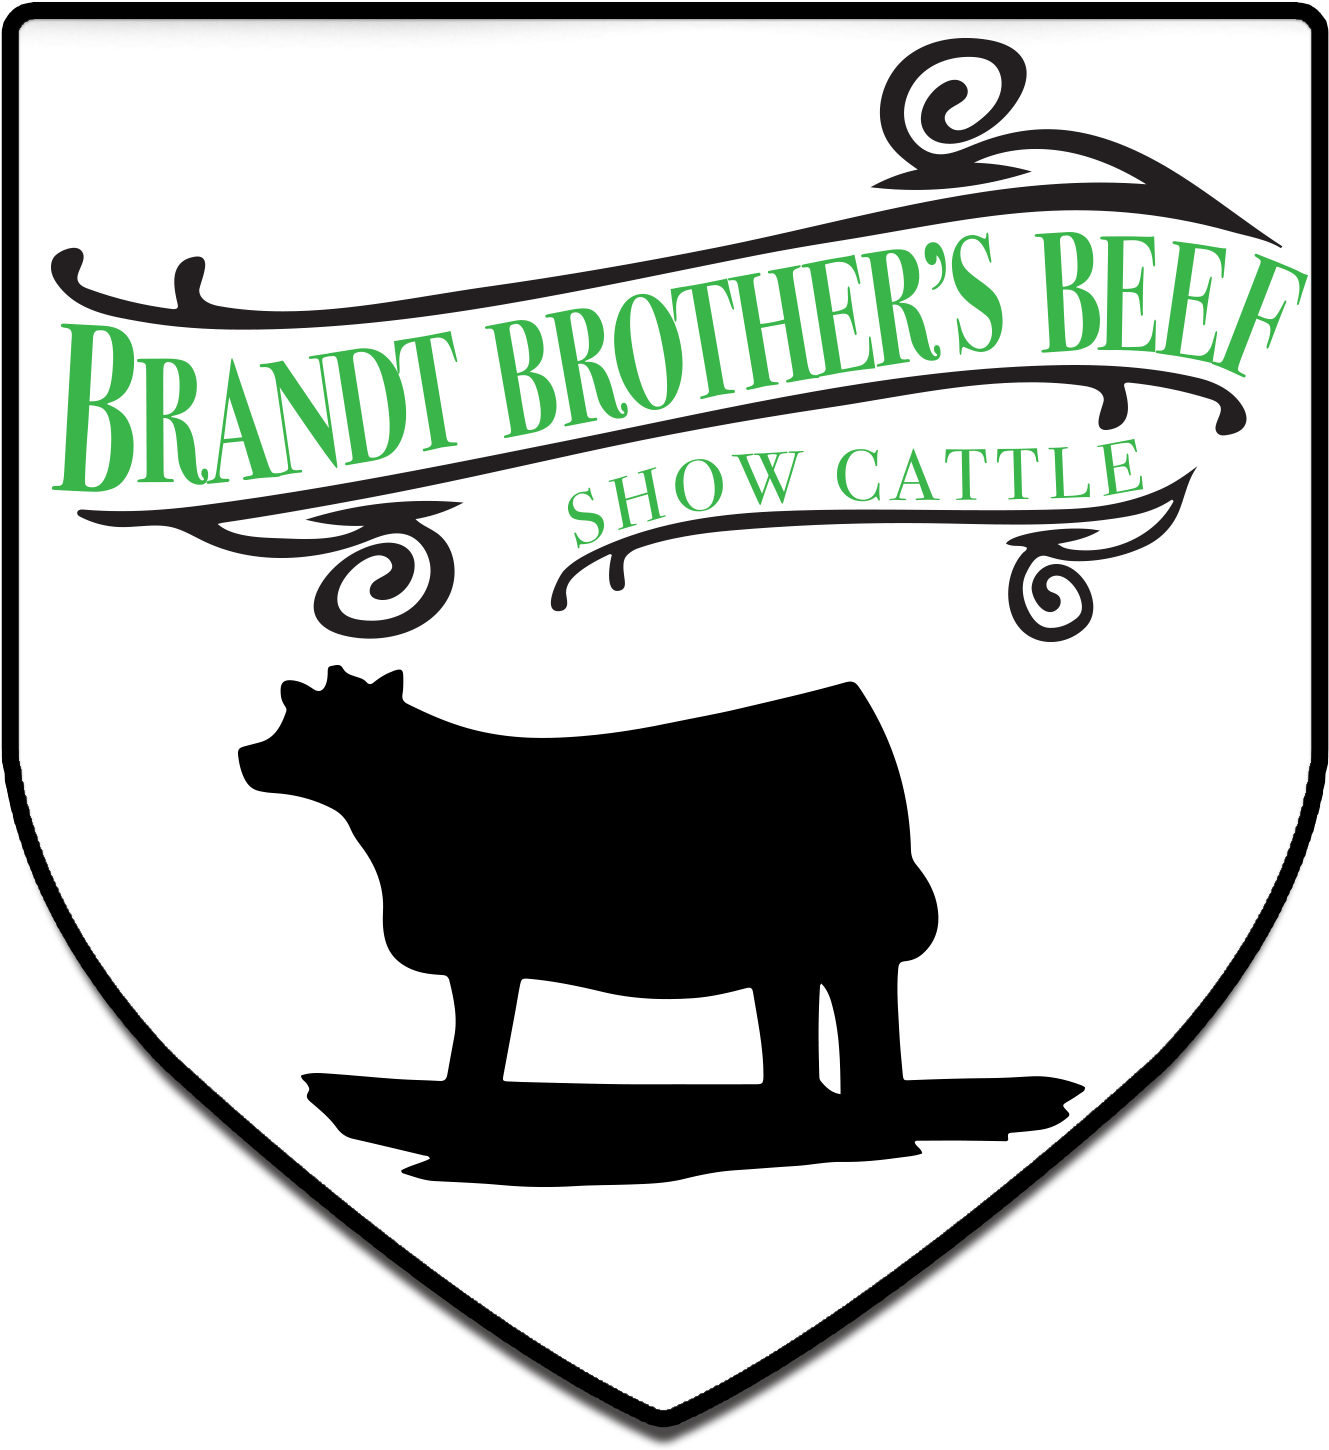 Brandt Brothers Beef & Show Cattle - Cattle (1500x1500)